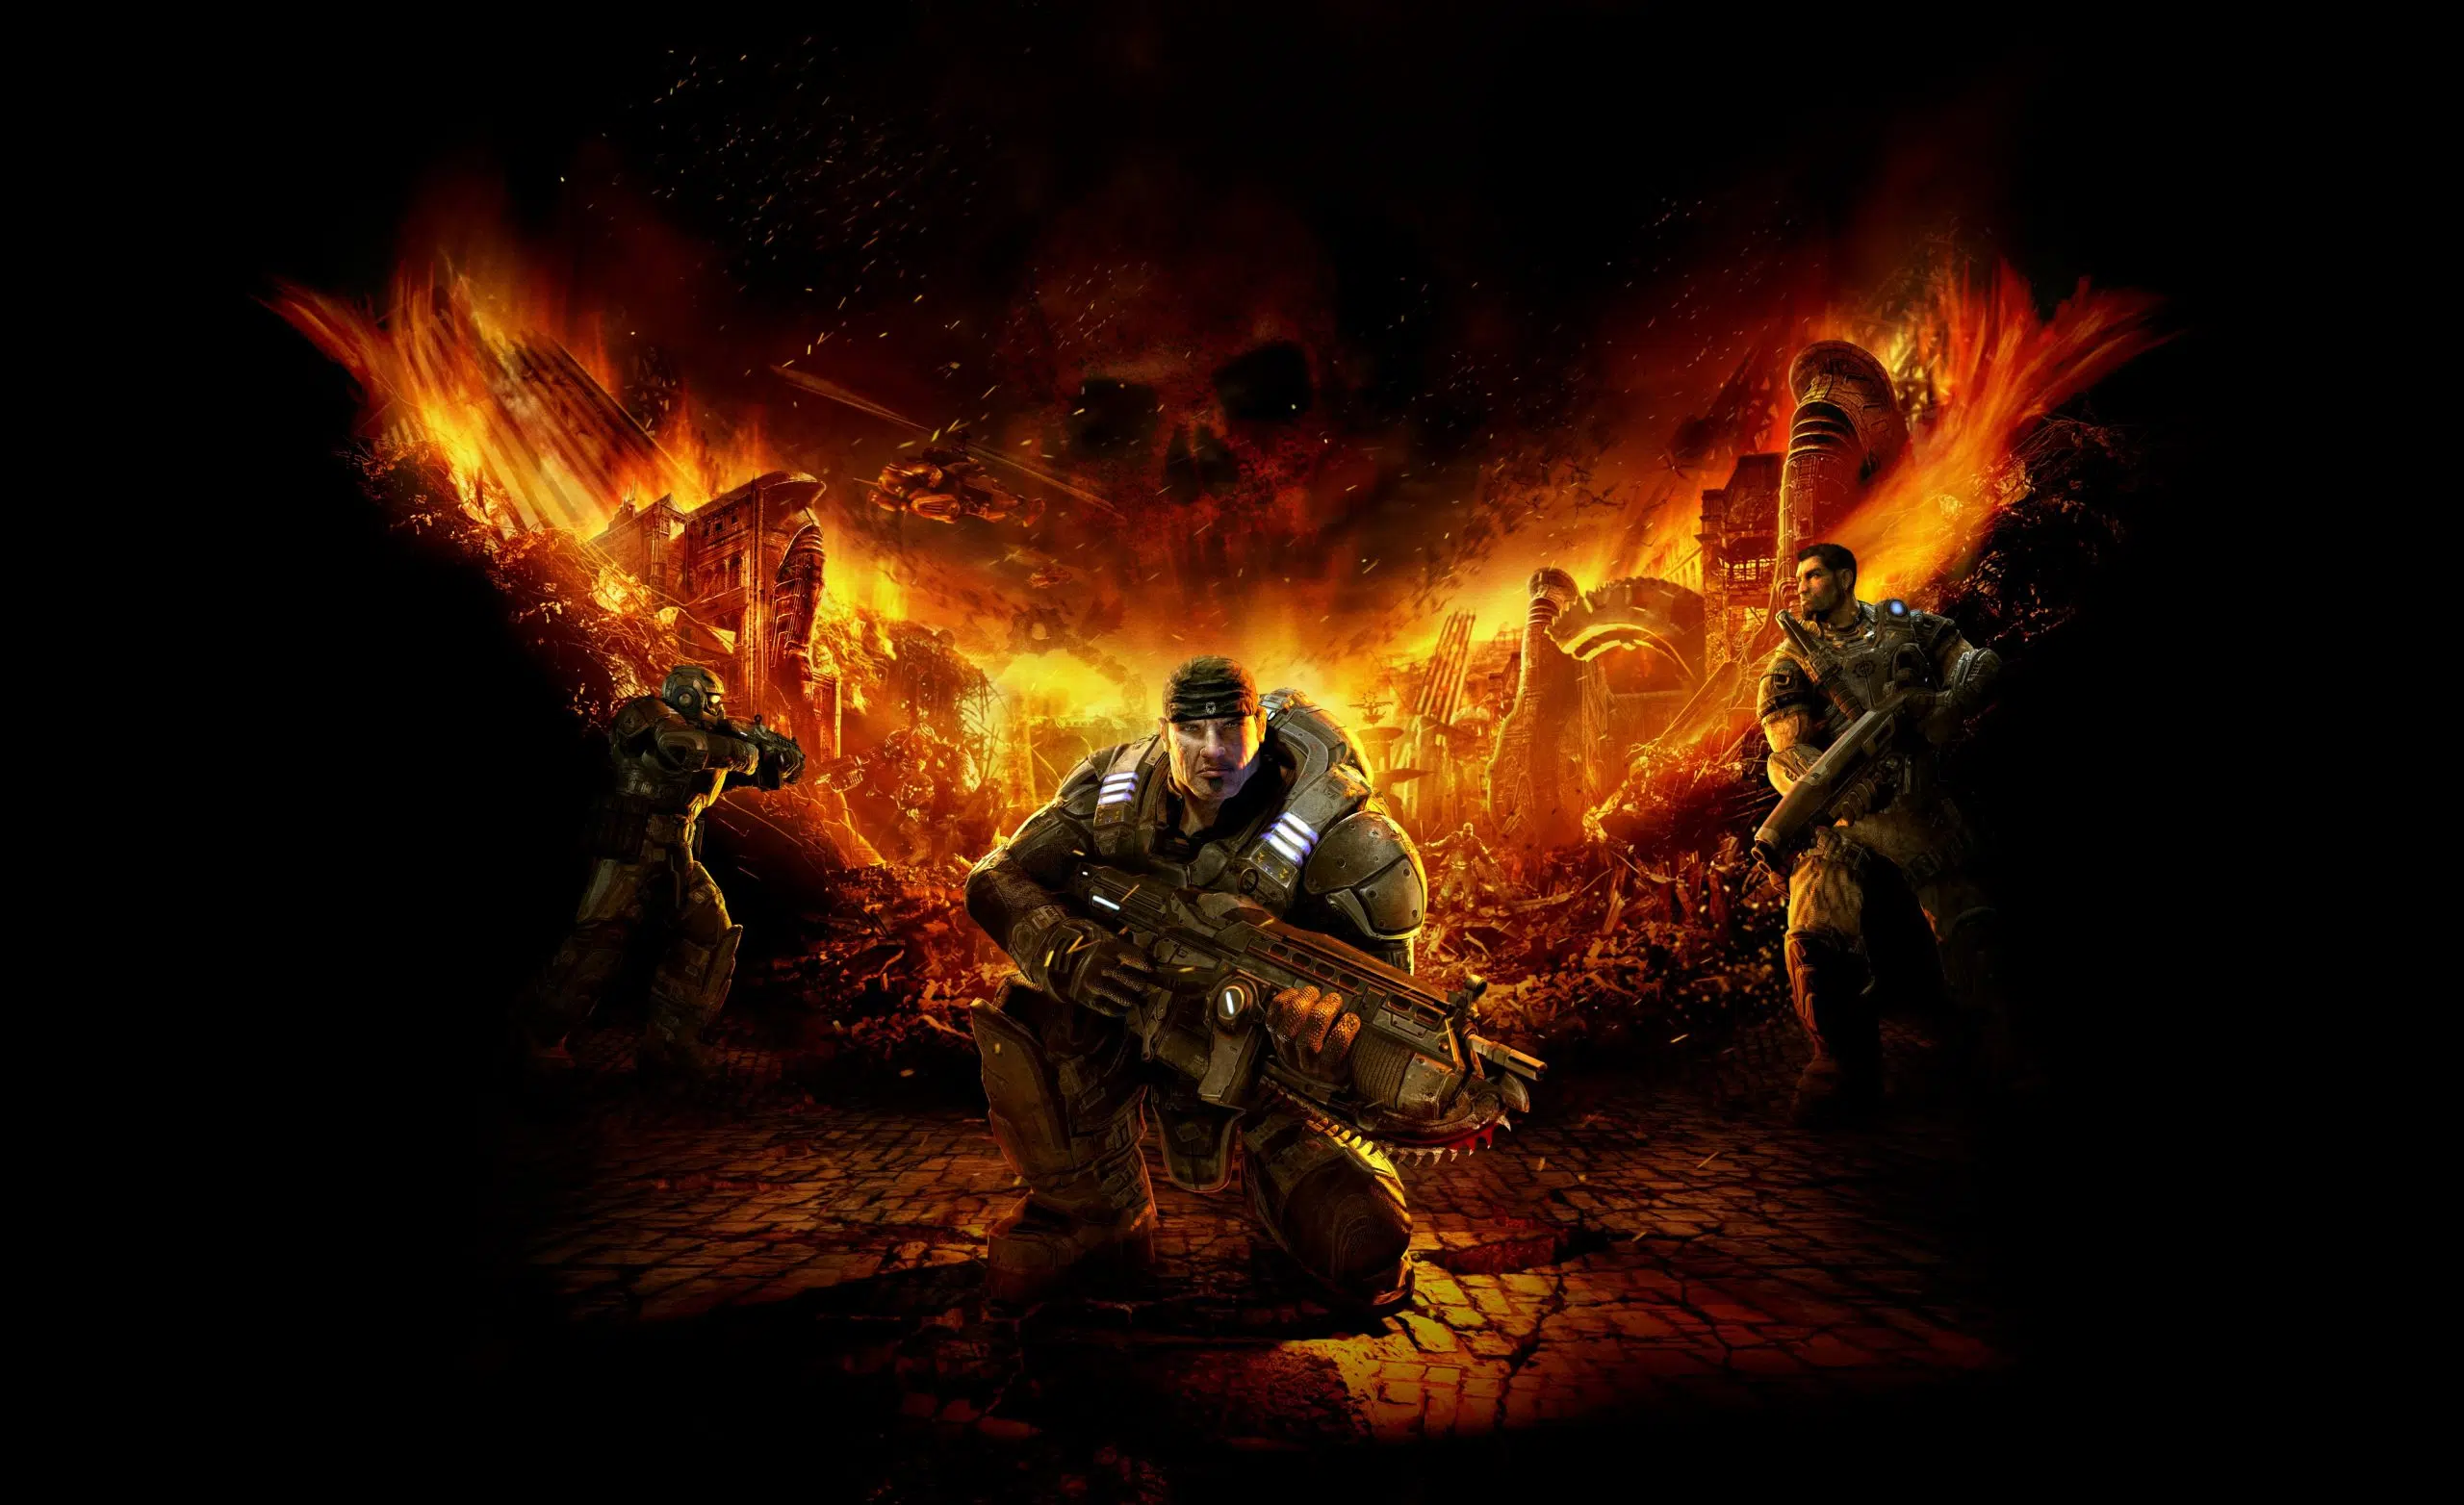 Netflix Announces "Gears of War" Movie and Animated Series